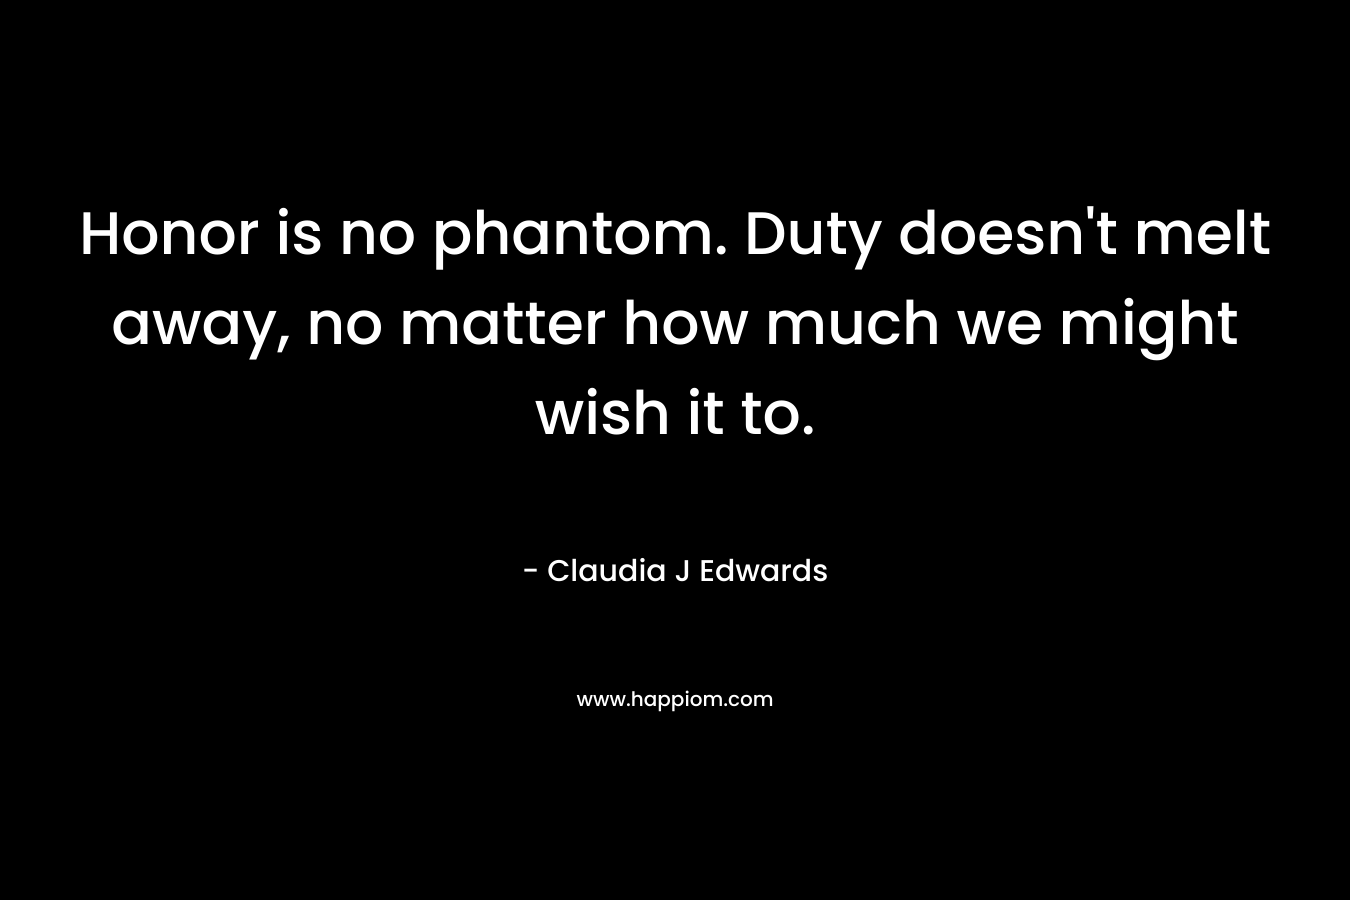 Honor is no phantom. Duty doesn't melt away, no matter how much we might wish it to.